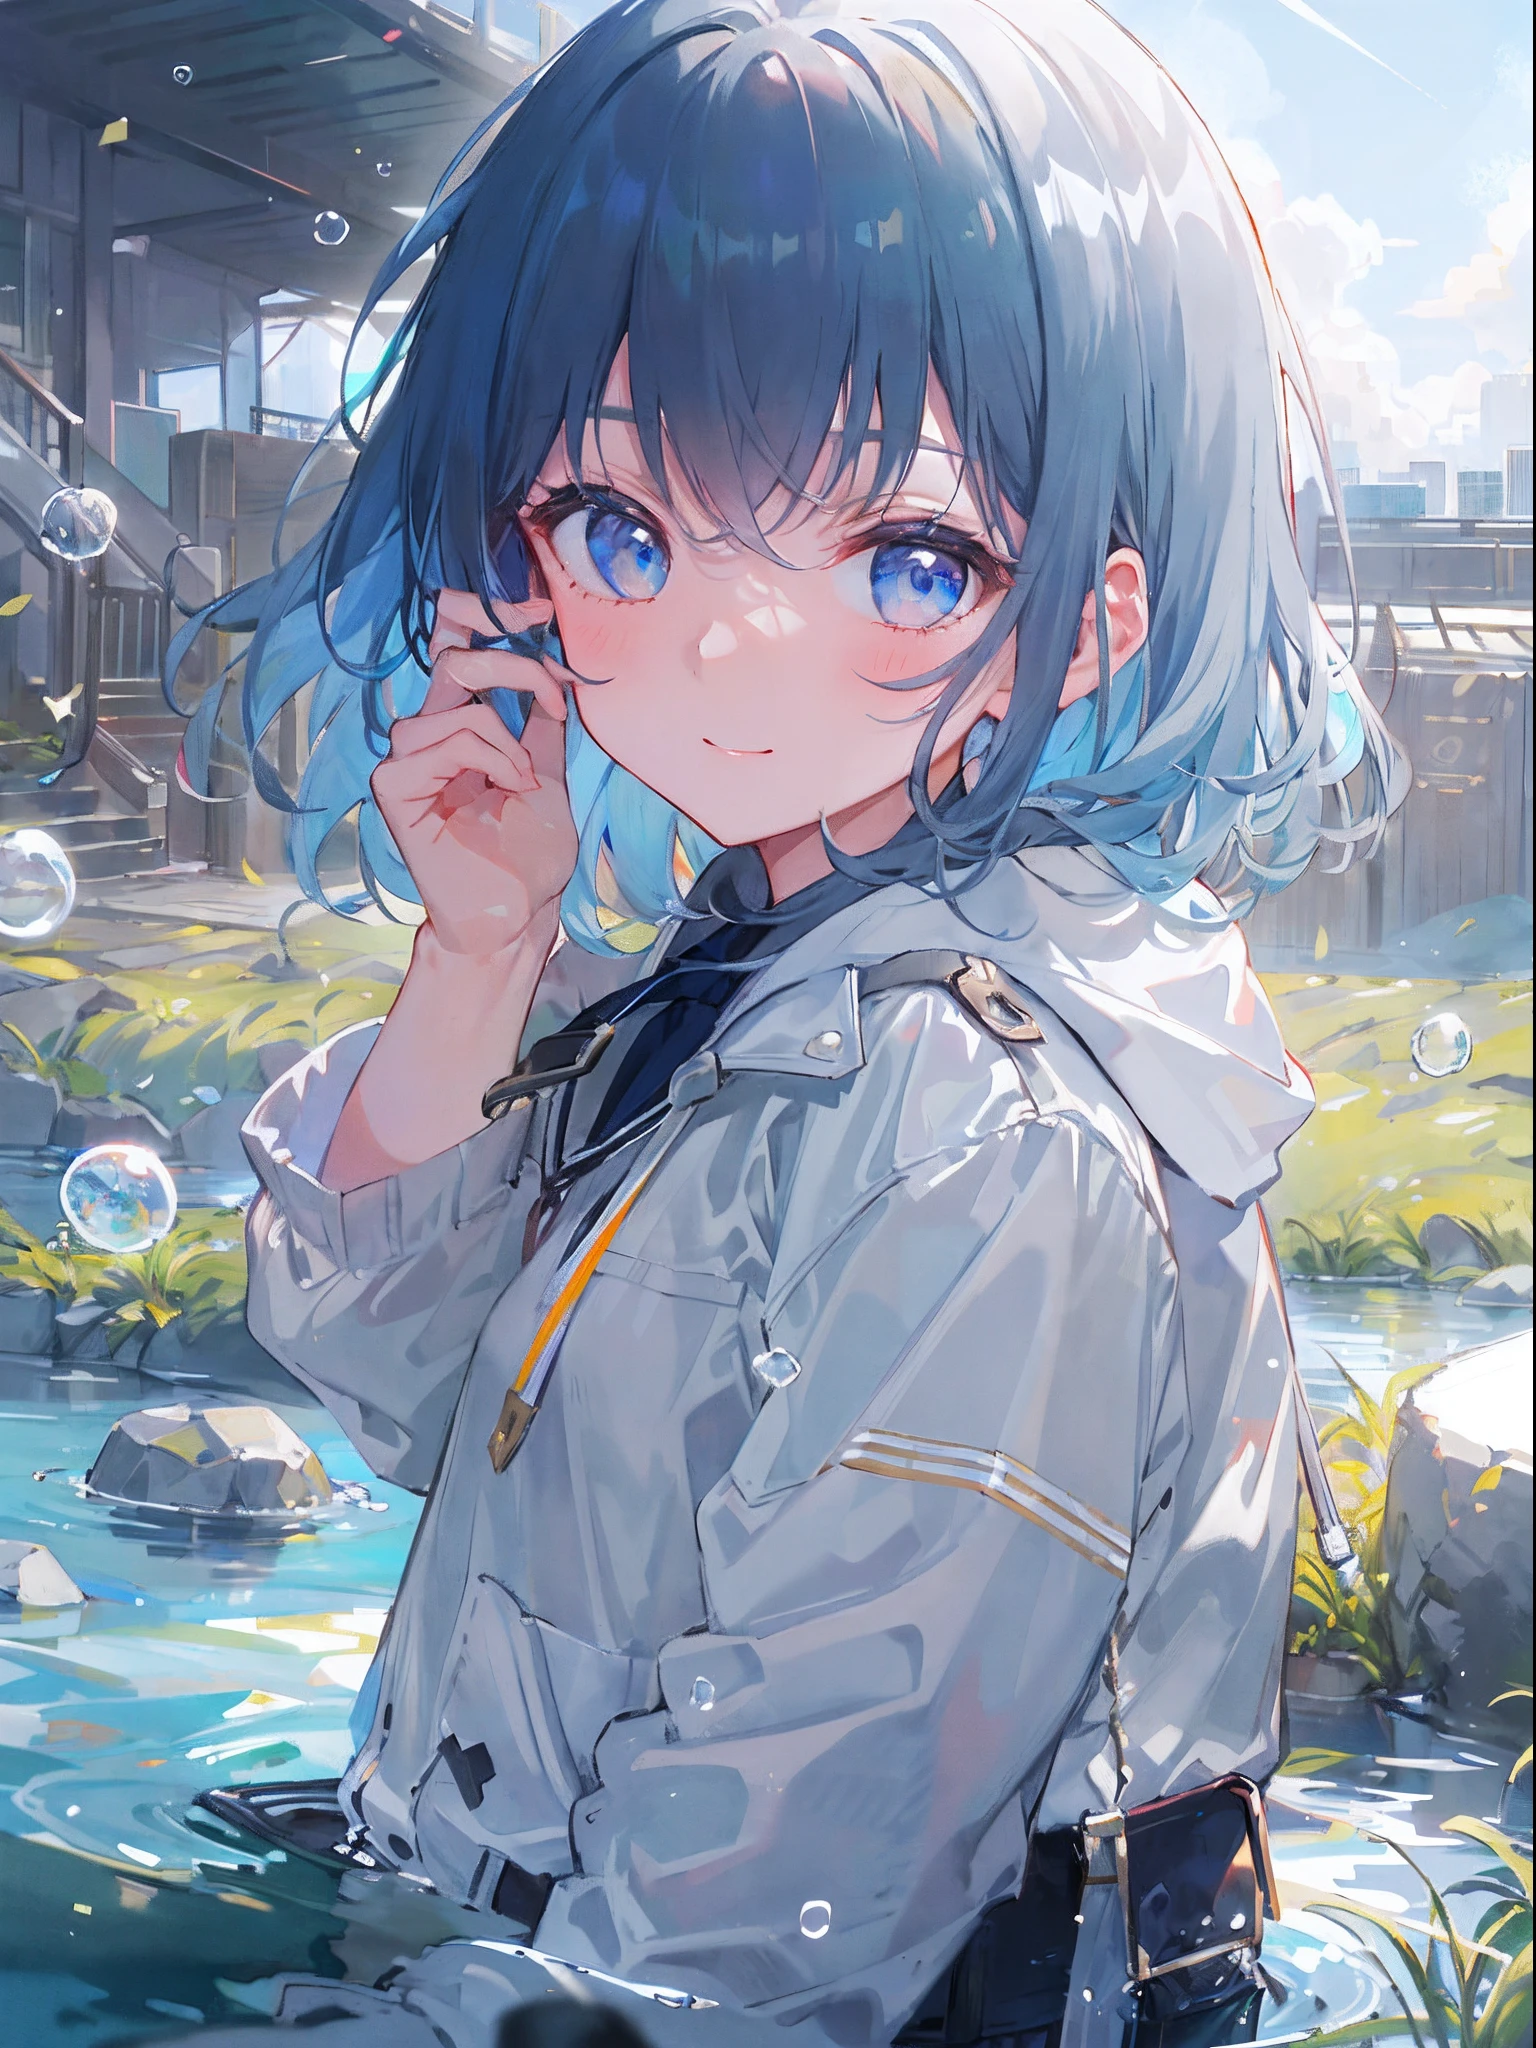 ((top-quality)), ((​masterpiece)), ((Ultra-detail)), (extremely delicate and beautiful), girl with, solo, cold attitude,((Black jacket)),She is very(relax)with  the(Settled down)Looks,A darK-haired, depth of fields,evil smile,Bubble, under the water, Air bubble,bright light blue eyes,Inner color with light blue hair and dark blue tips,Cold background,Bob Hair - Linear Art, shortpants、knee high socks、White uniform like 、Light blue ribbon ties、Clothes are sheer、Hands in pockets